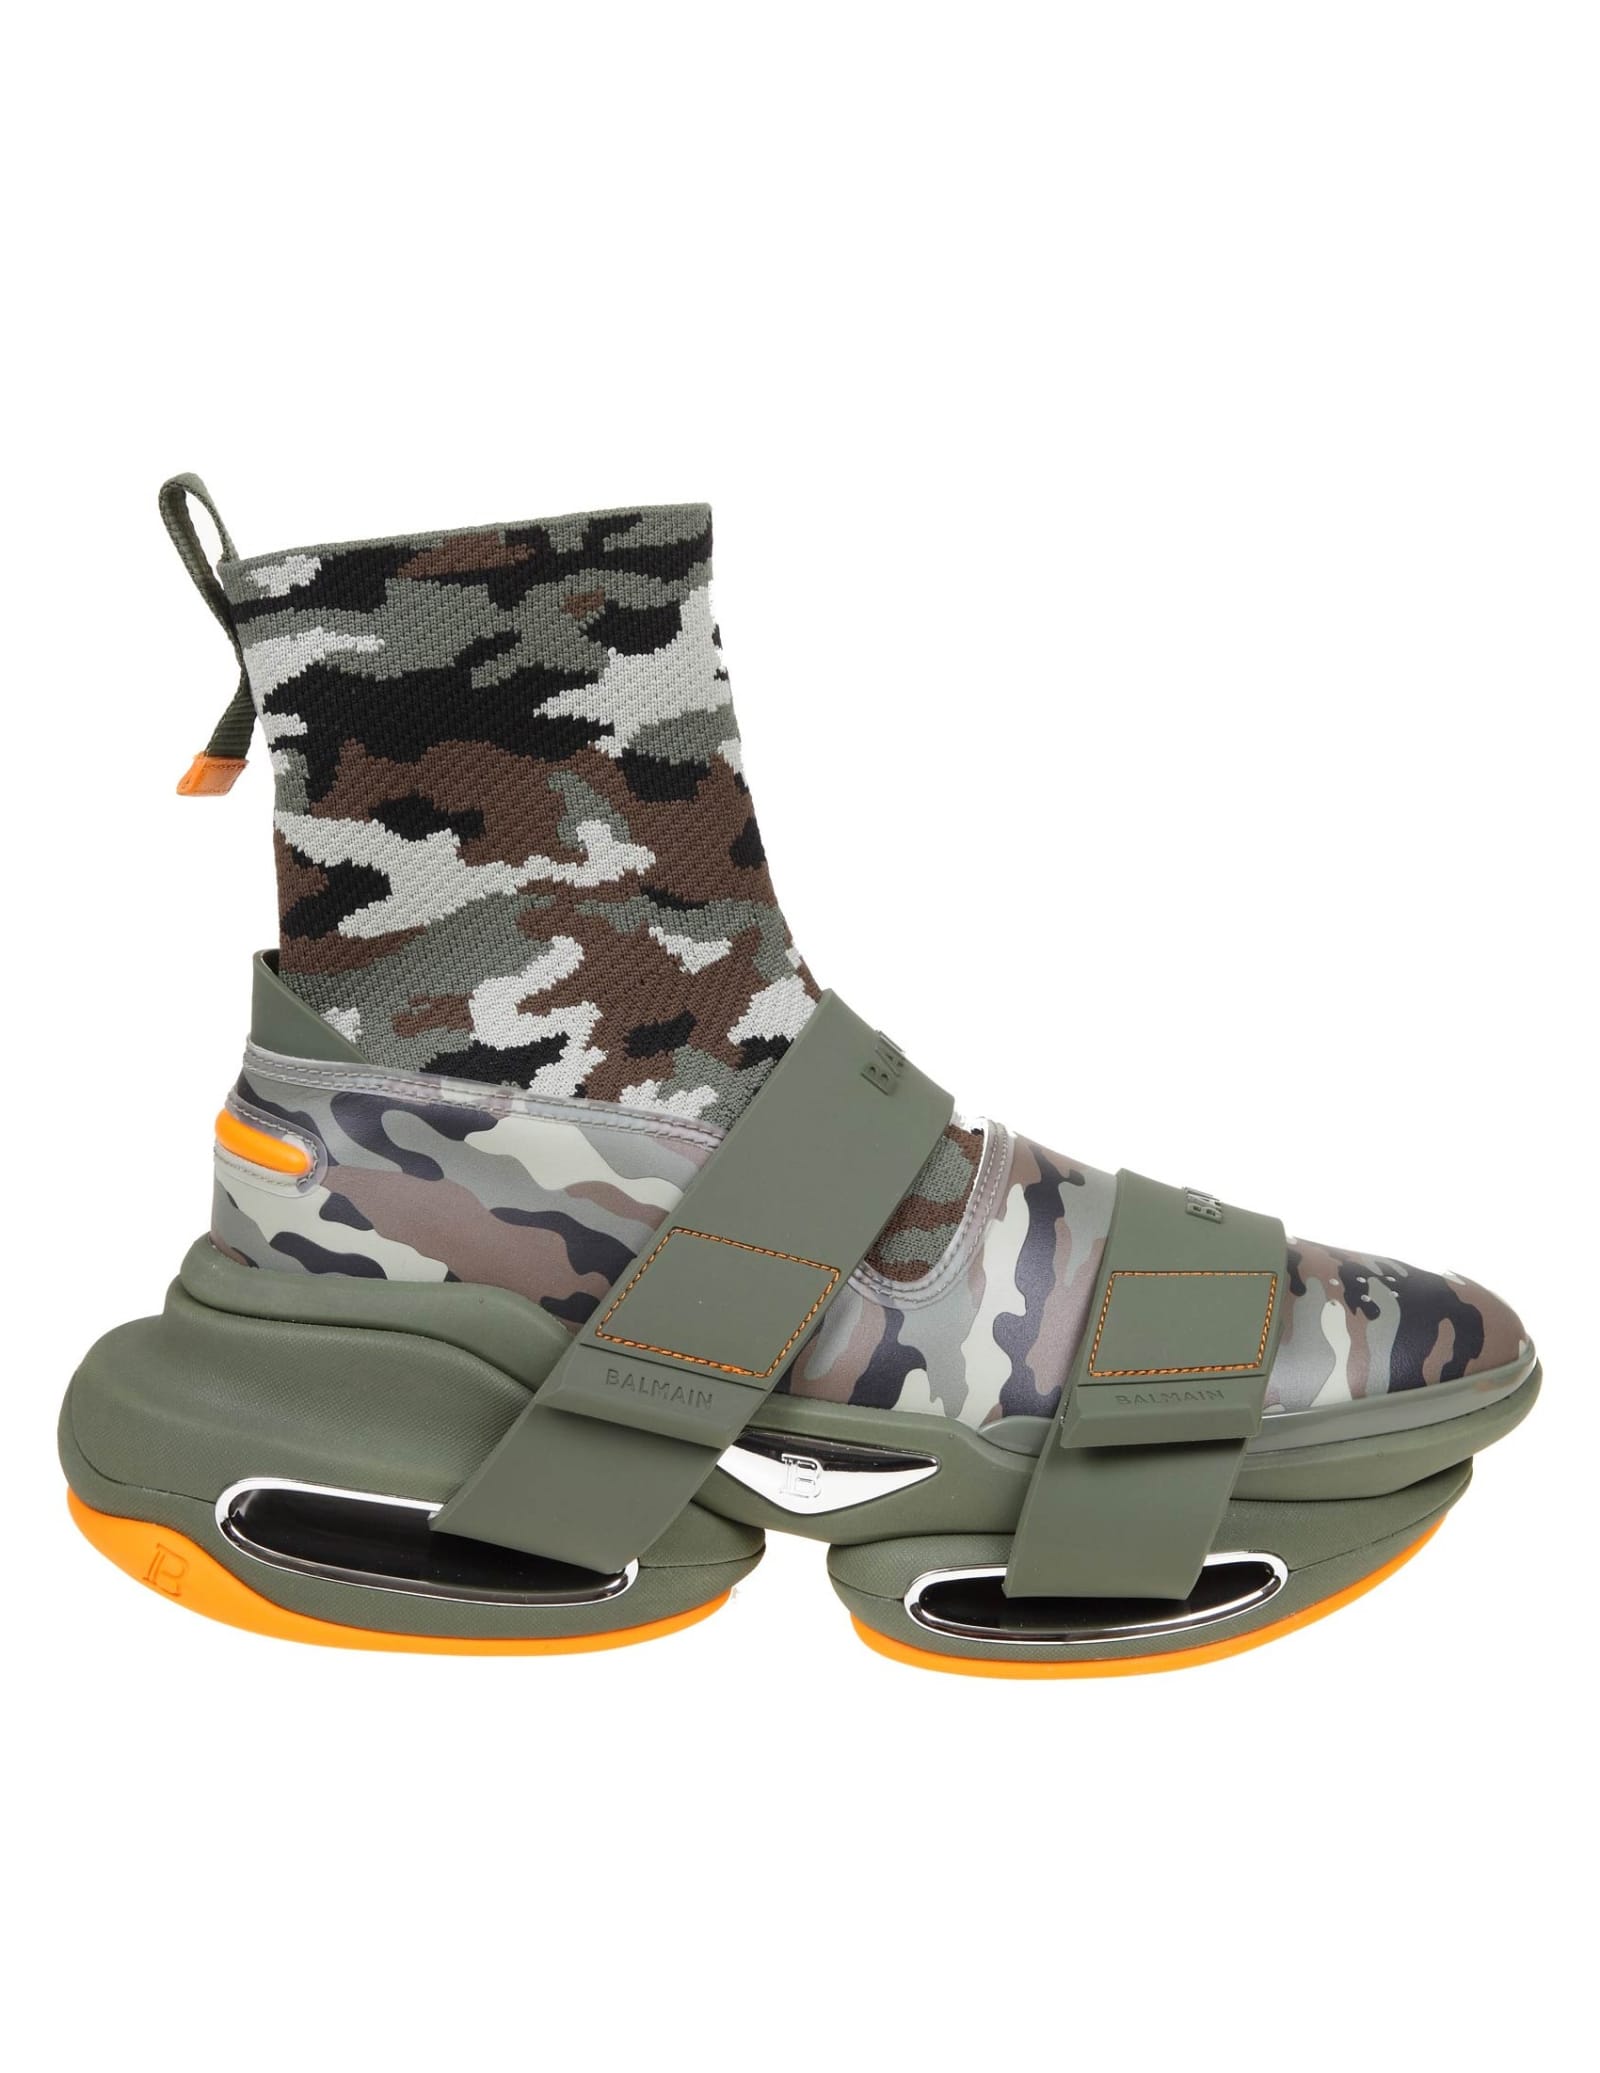 Balmain B Bold Sneakers With Camouflage Print